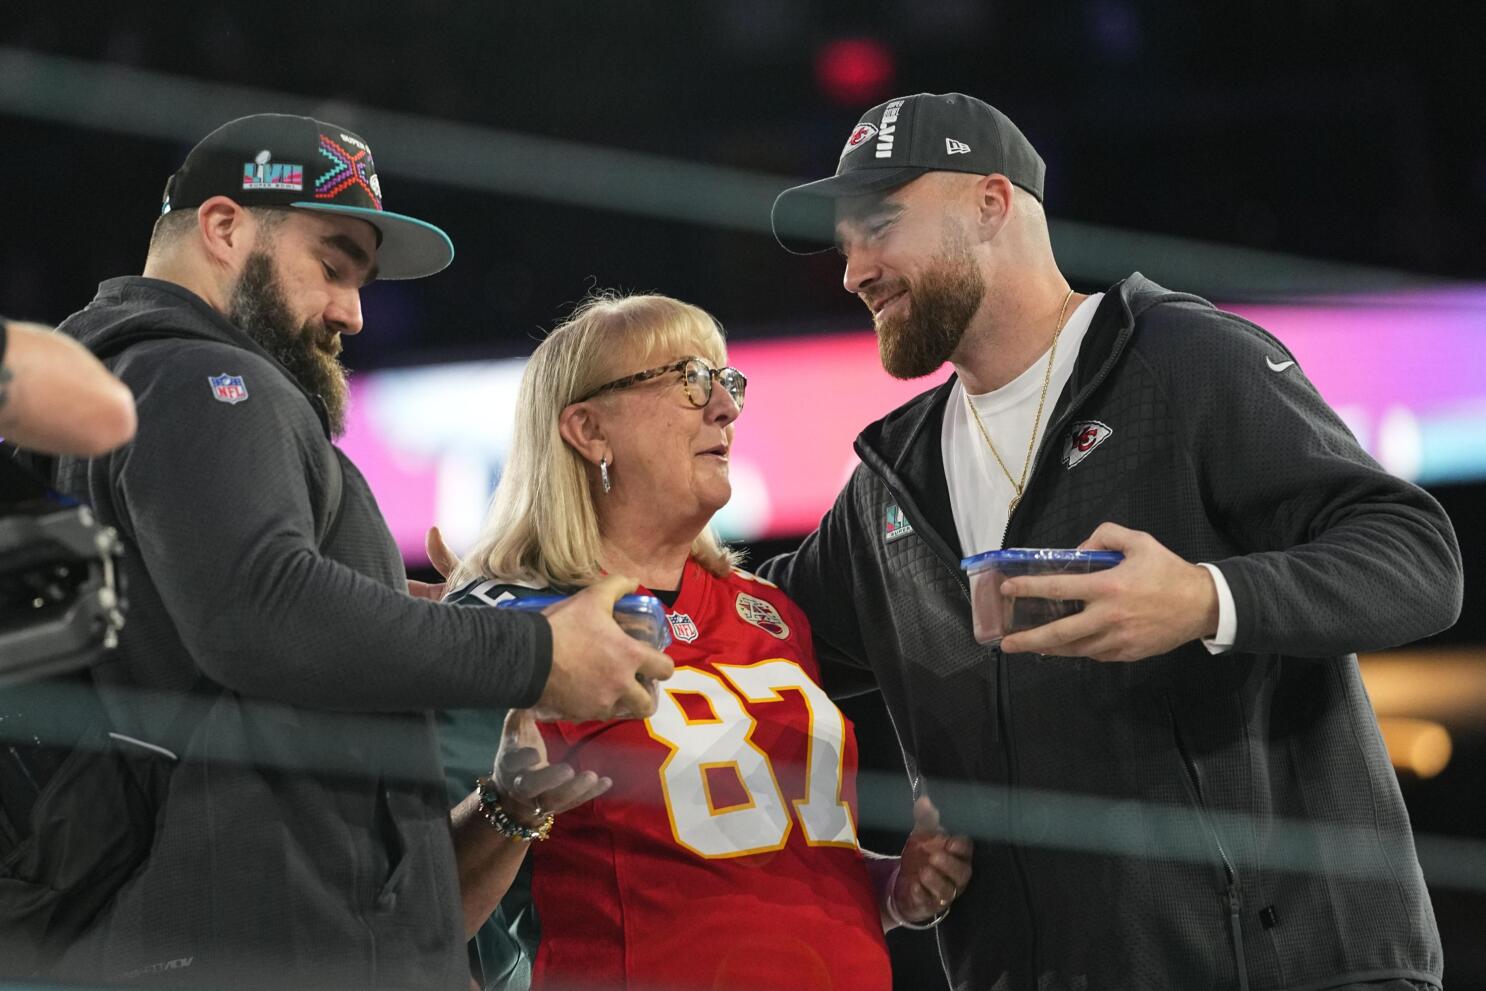 Exclusive : Donna Kelce always shows which of her children she loves the most Among Travis kelce and Jason kelce - fans discover her secret...